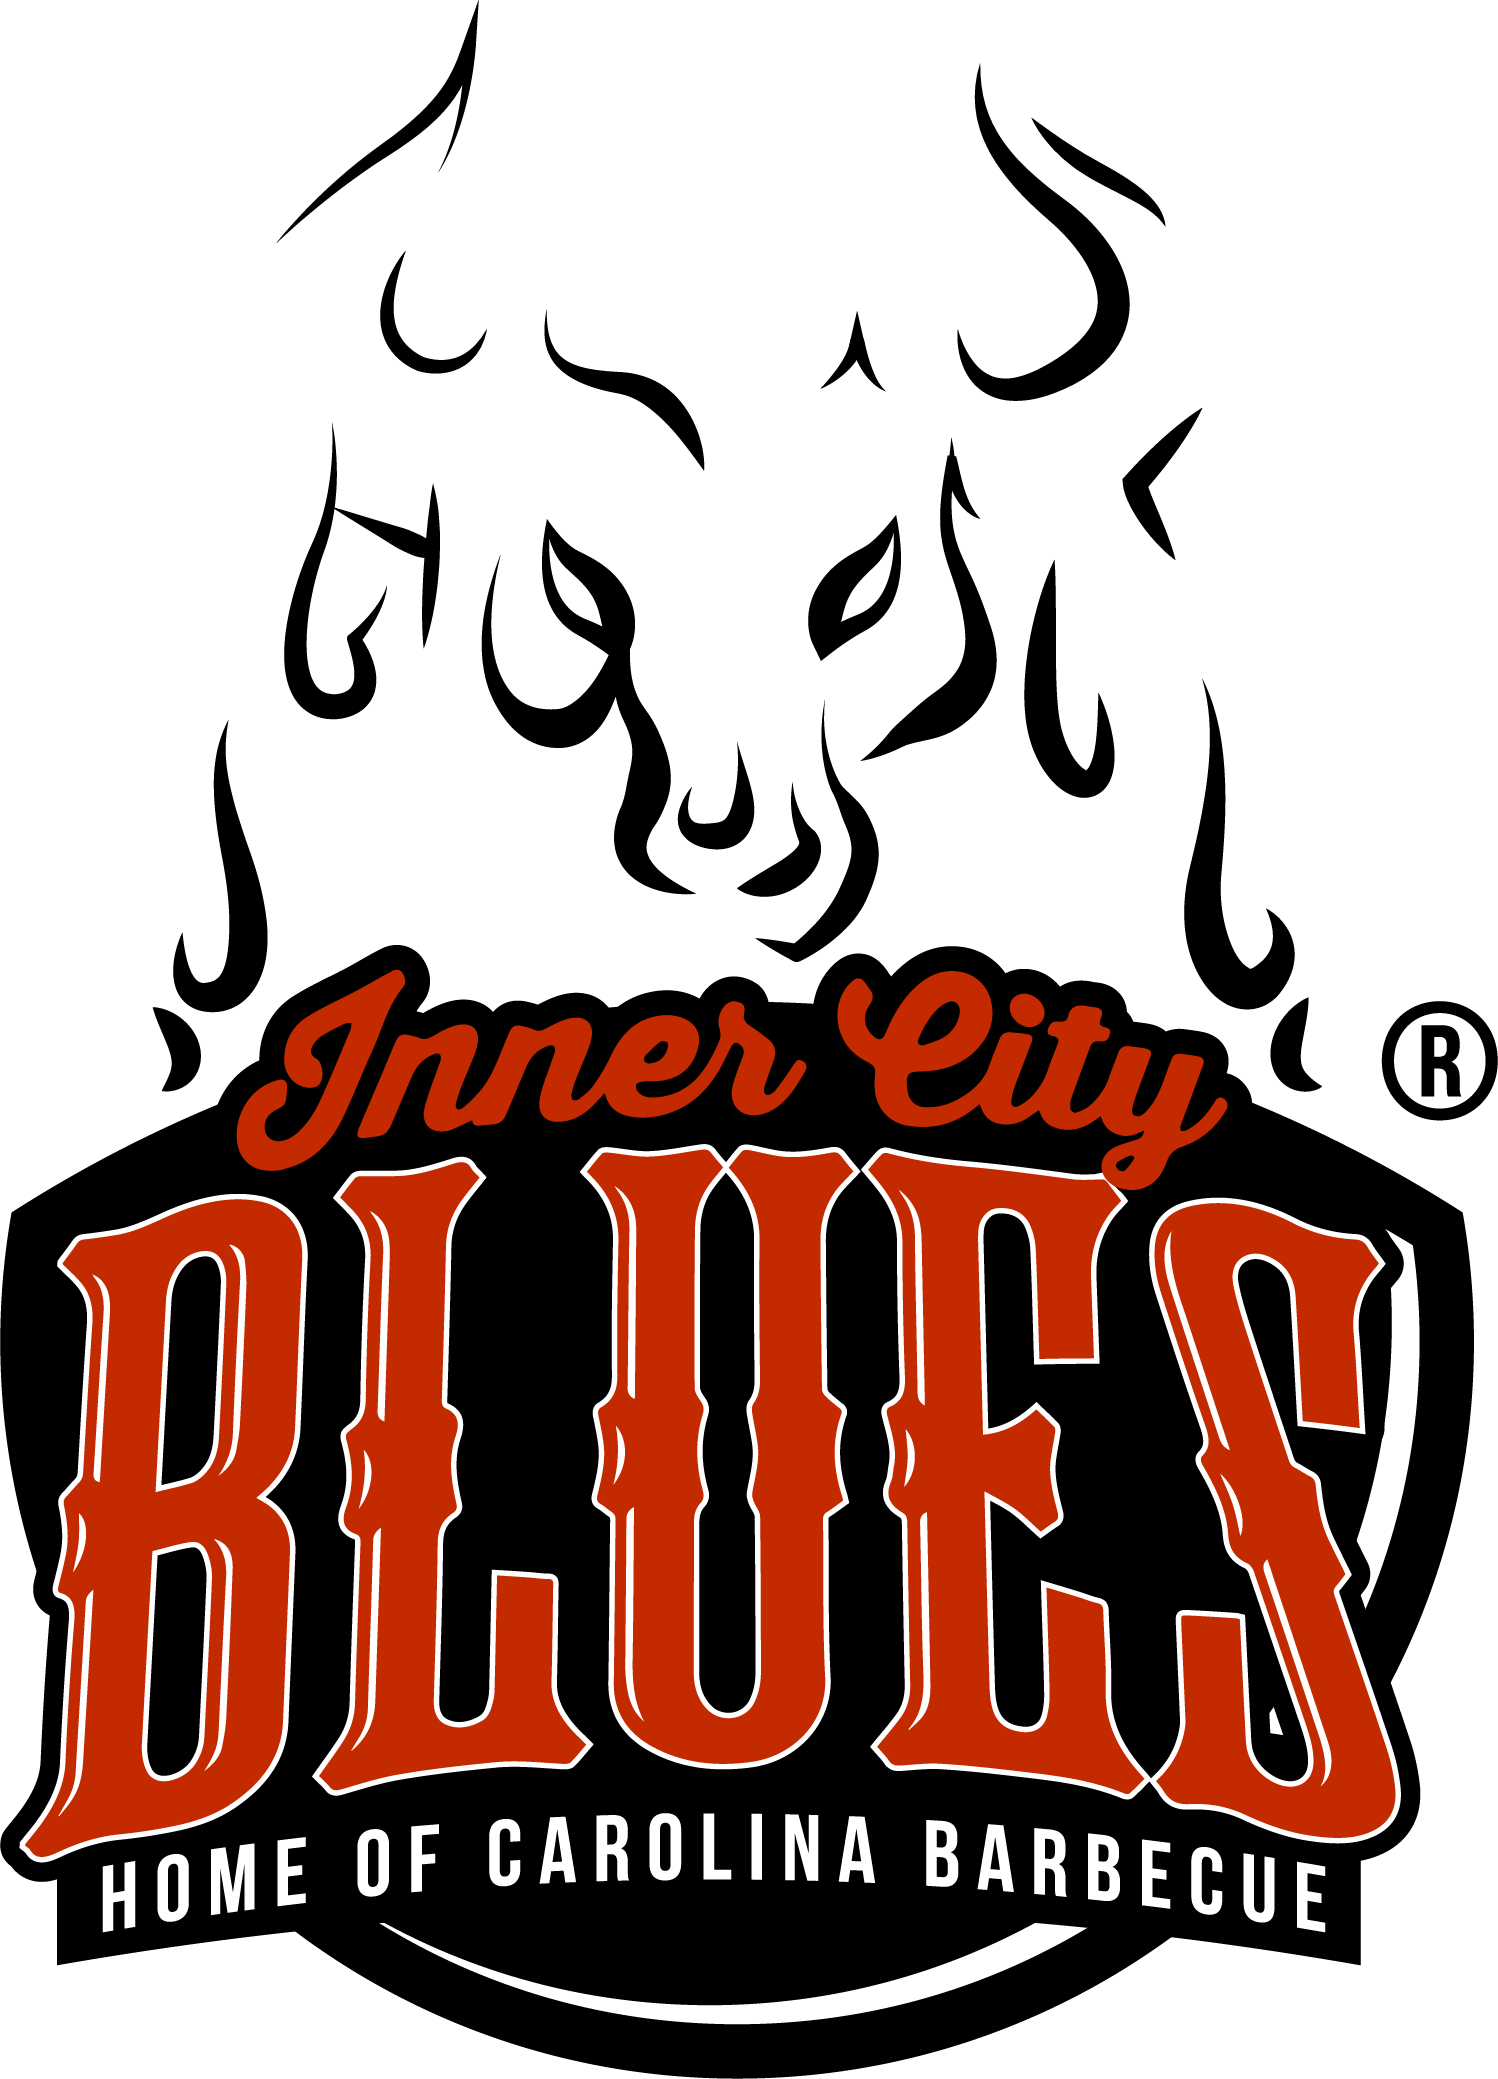 The logo or business face of "Inner City Blues"